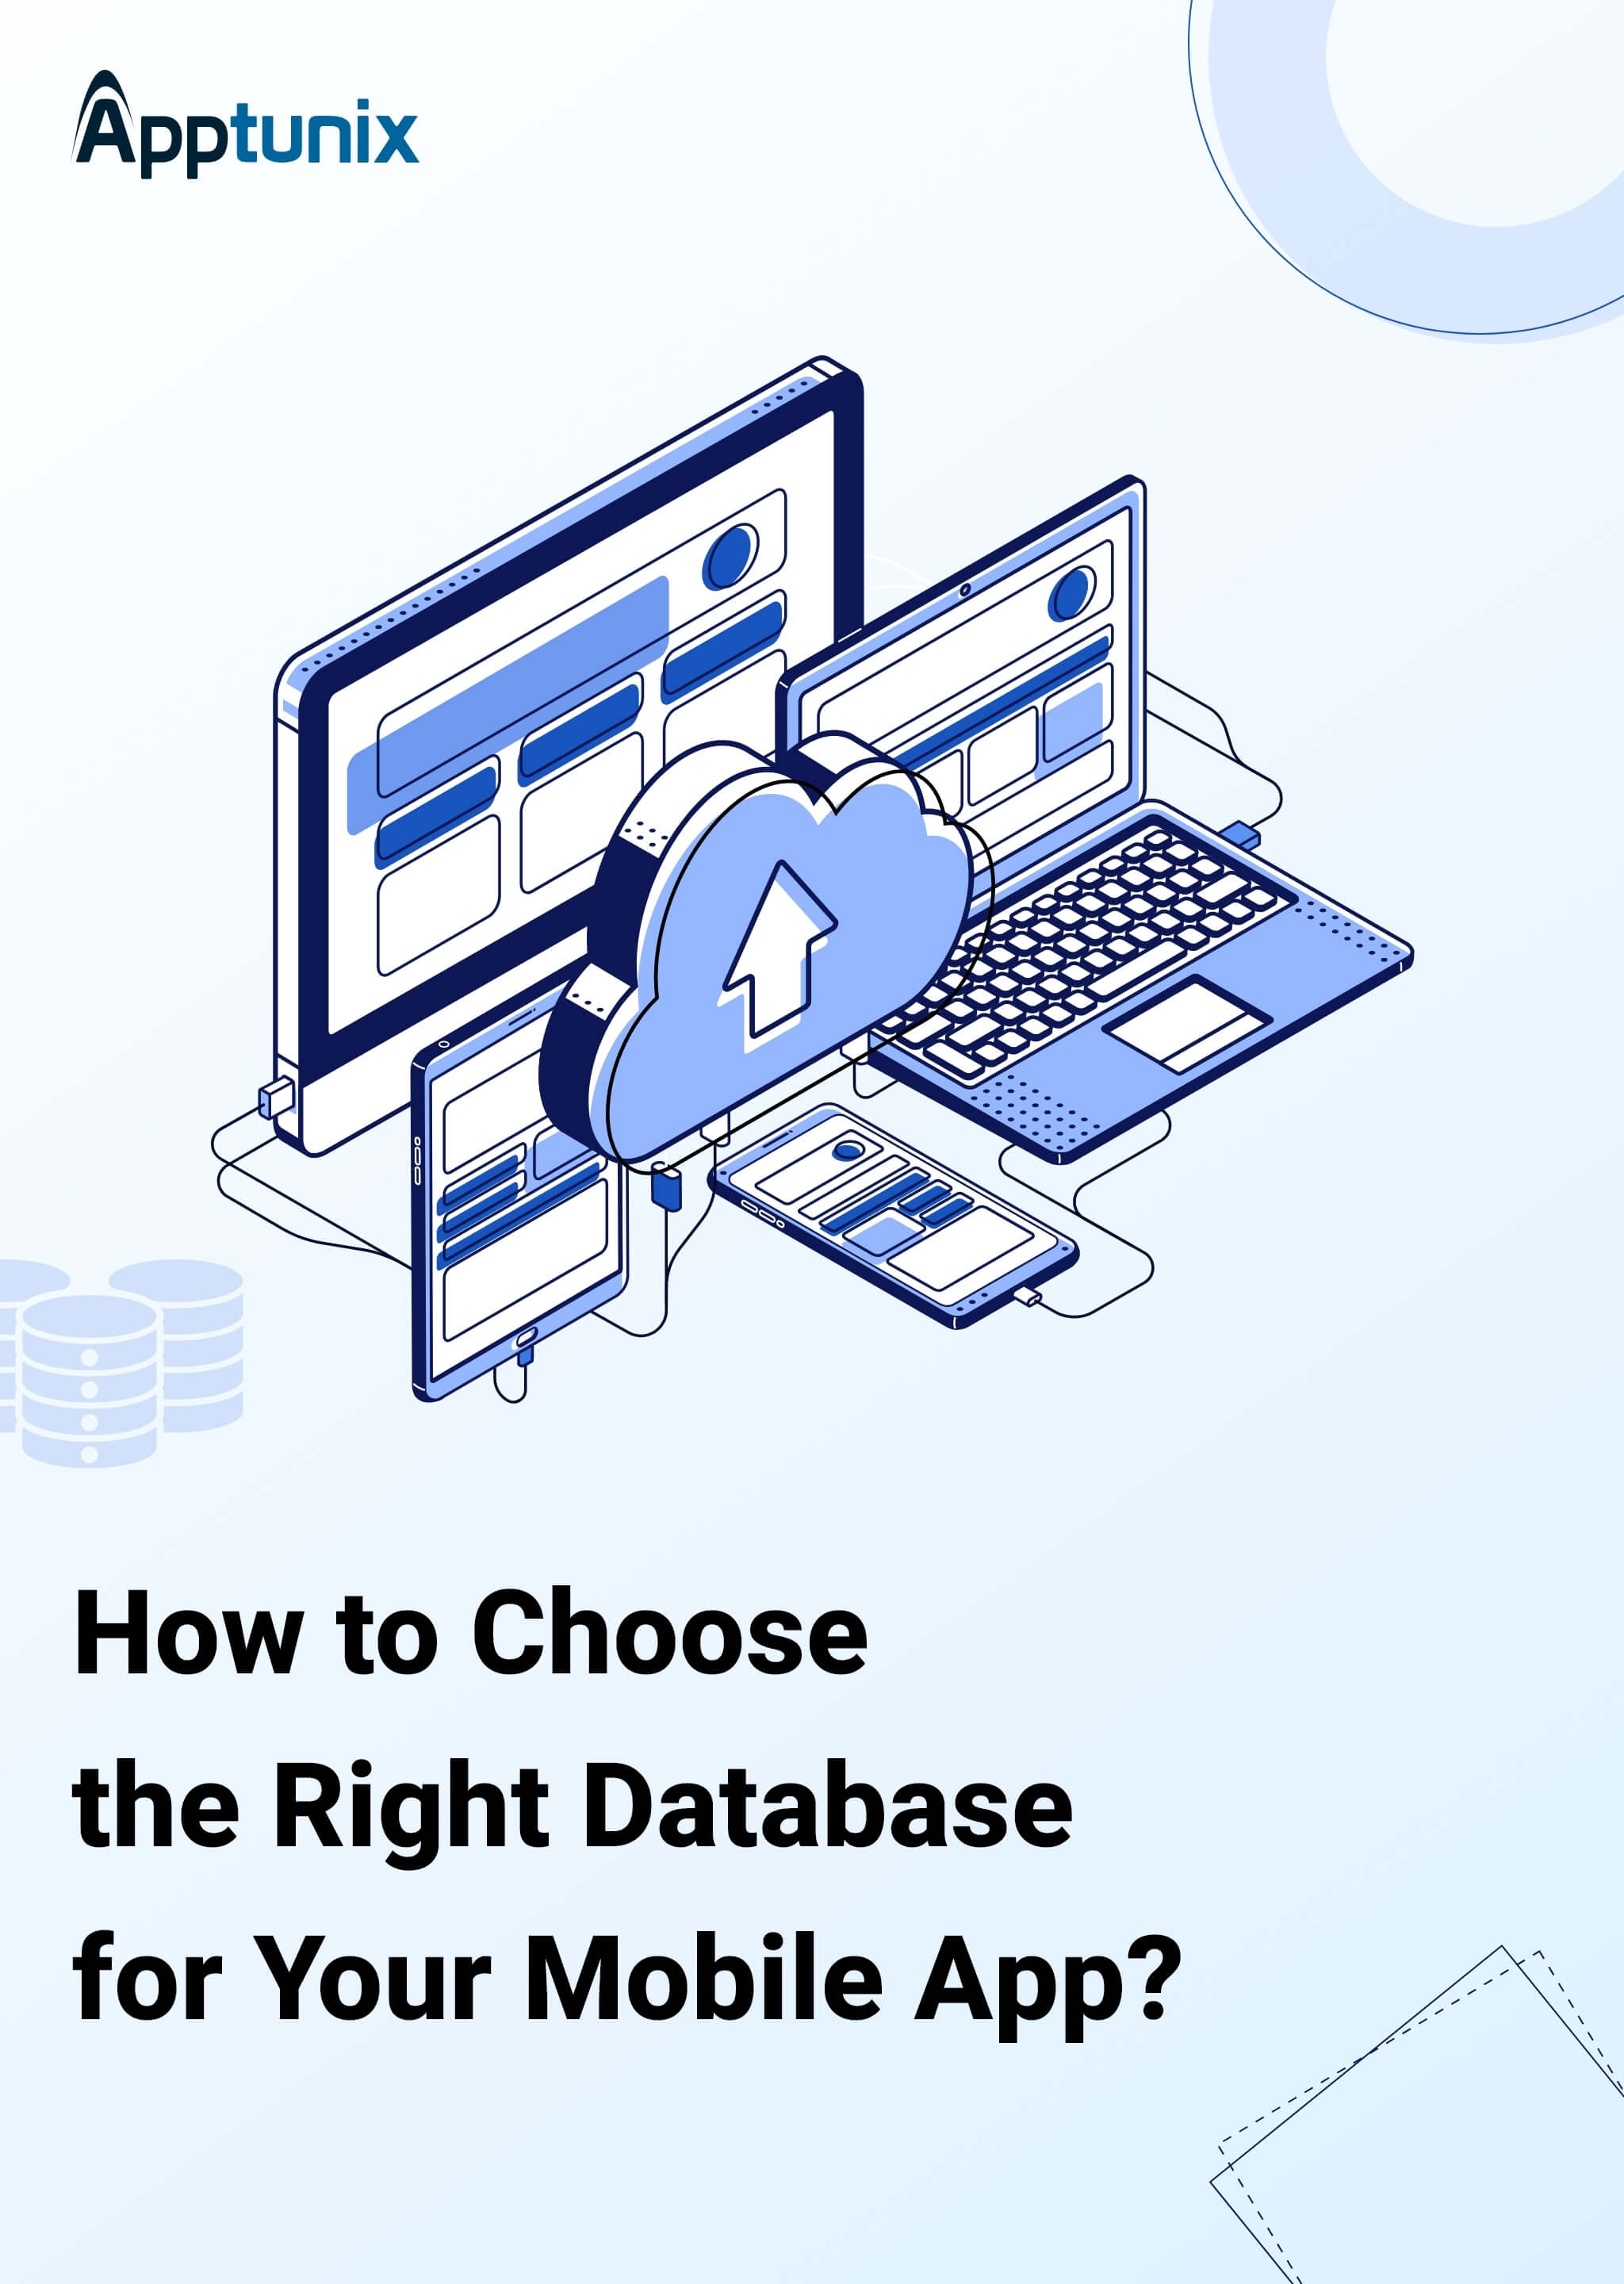 How to Choose the Right Database for Your Mobile App?